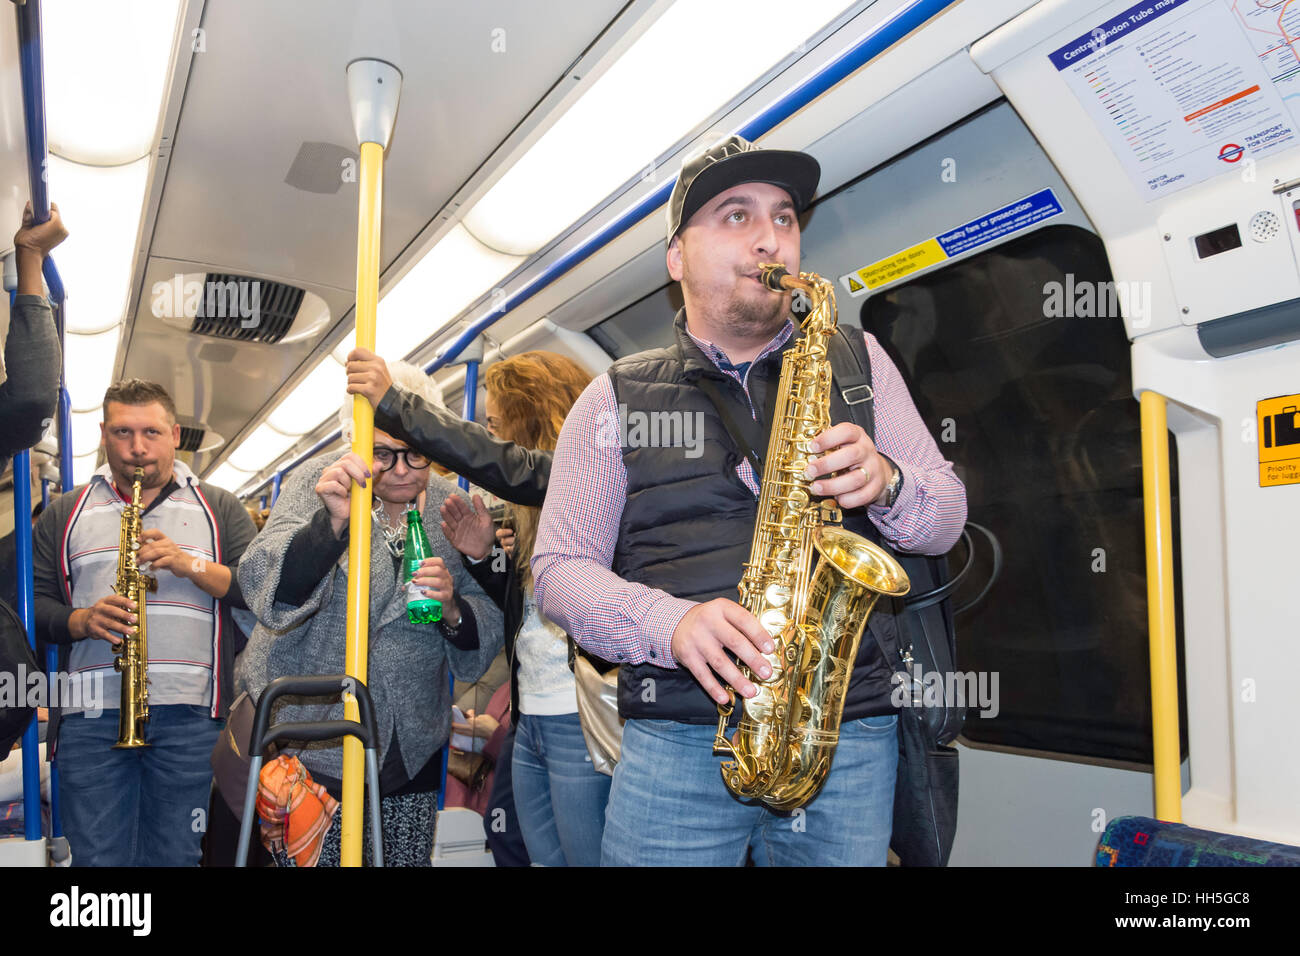 Buskers playing music in London Underground carriage, West End, City of Westminster, Greater London, England, United Kingdom Stock Photo